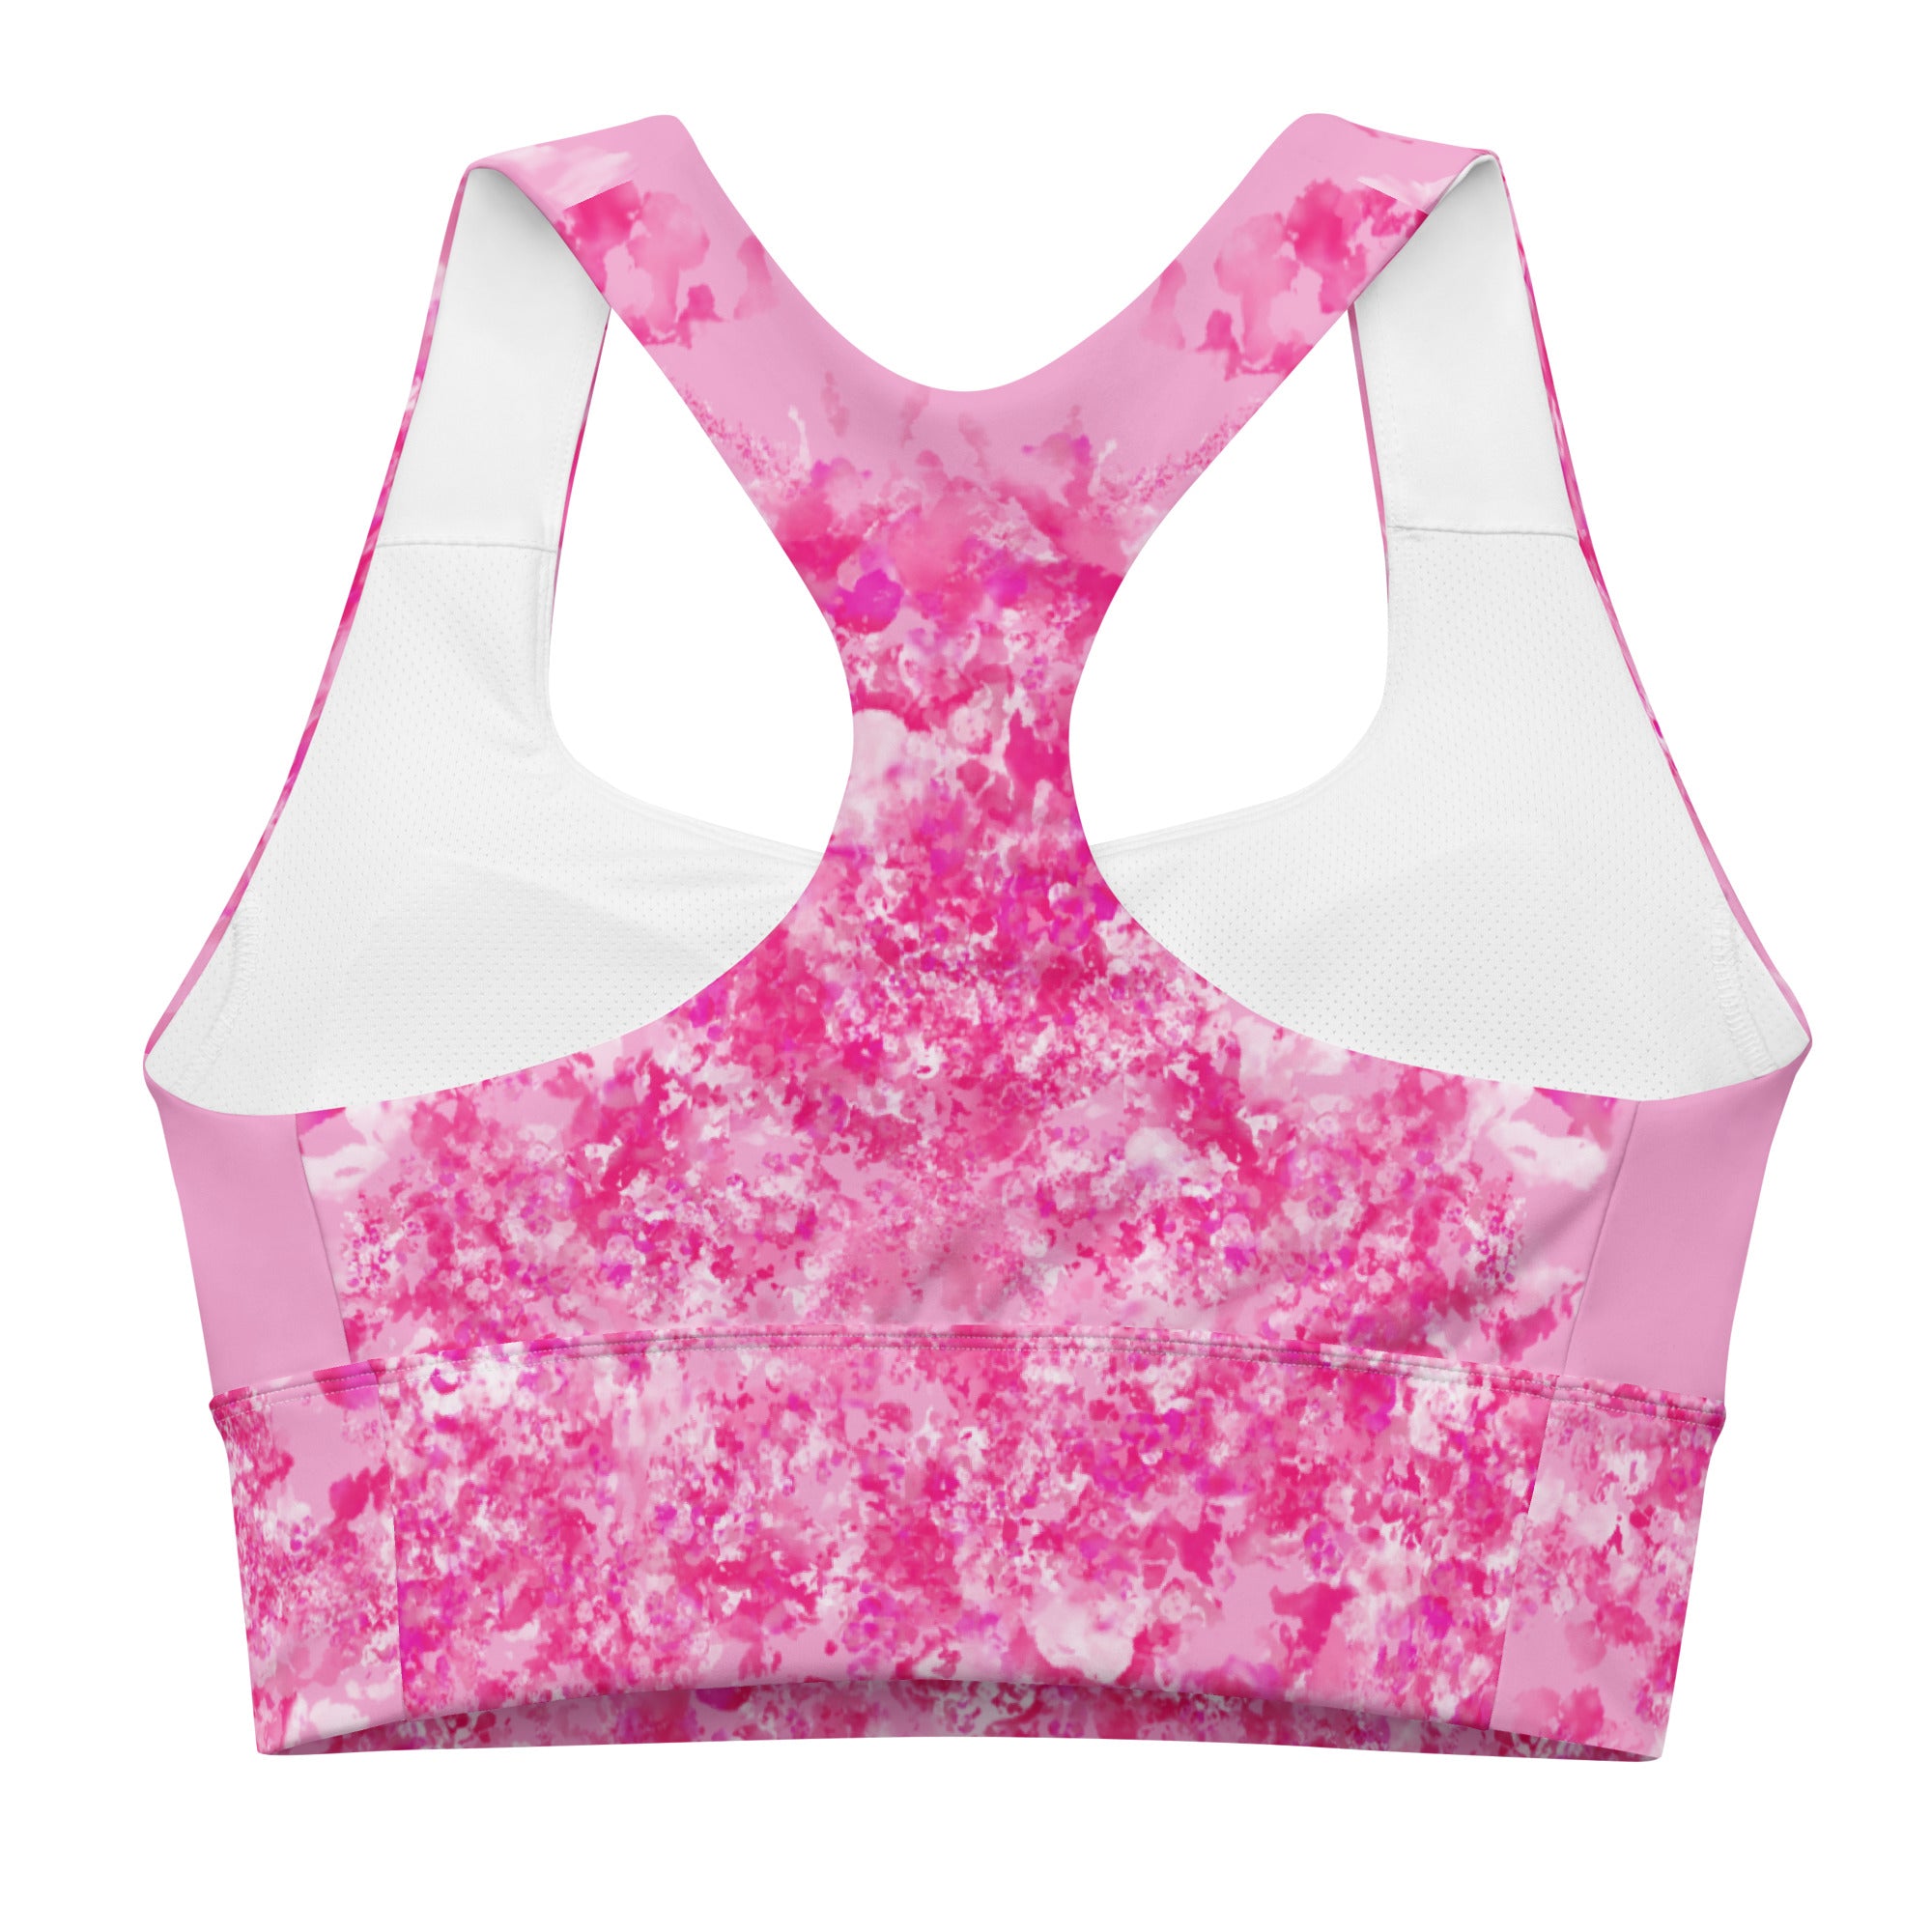 Crafted with high-quality materials, this sports bra offers exceptional comfort and stability during workouts. 